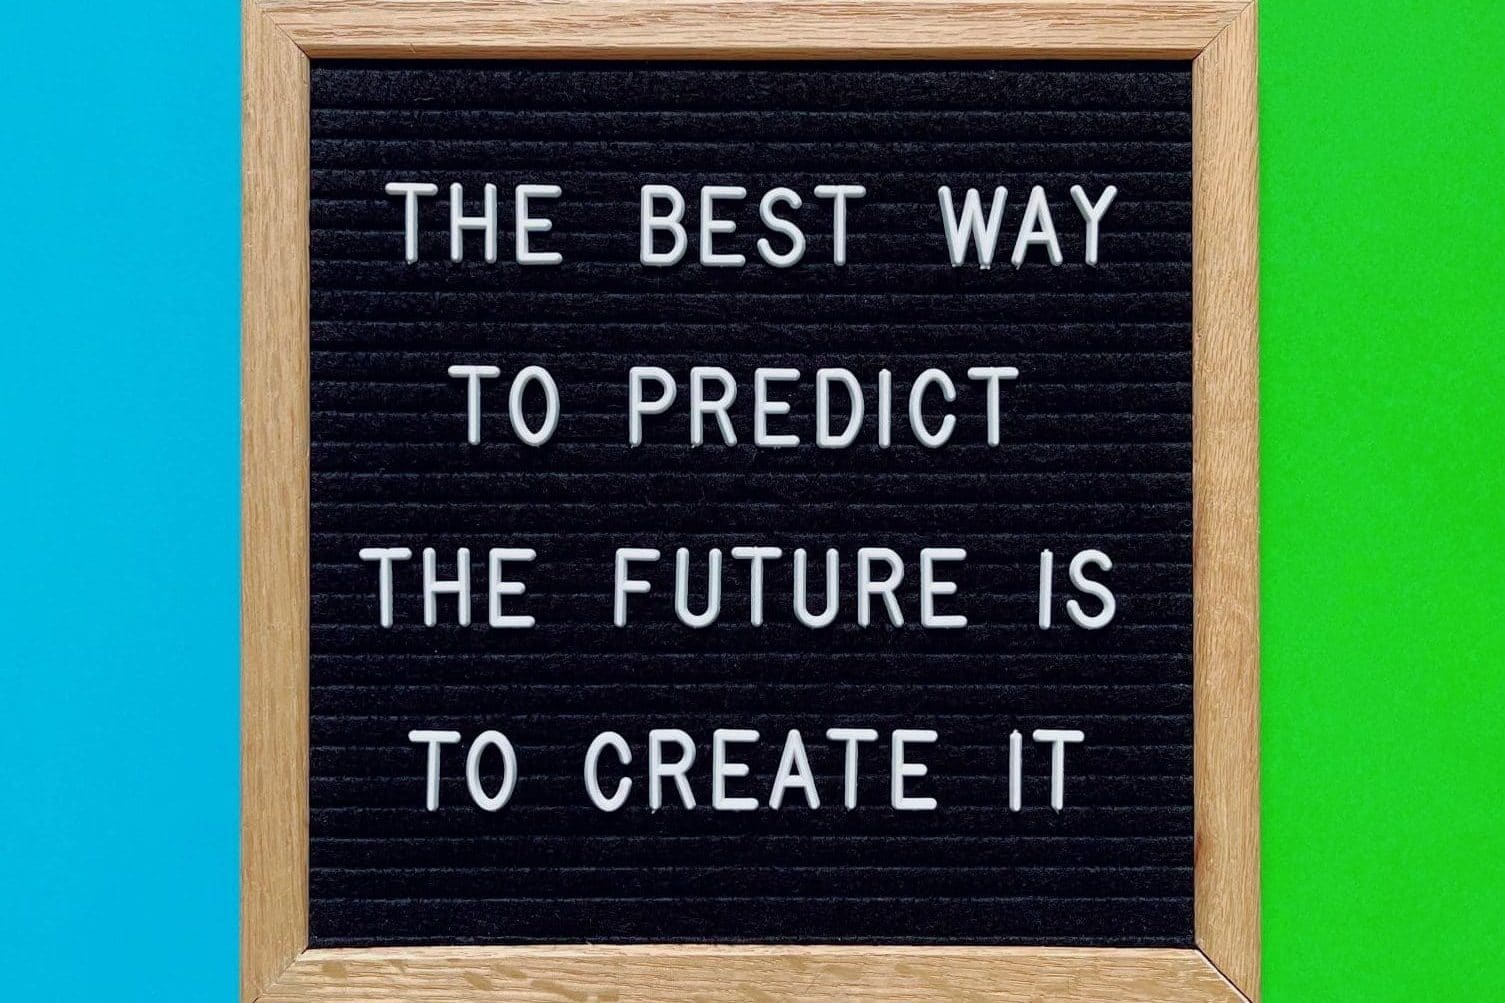  board with the quote “The best way to predict the future is to create it.”